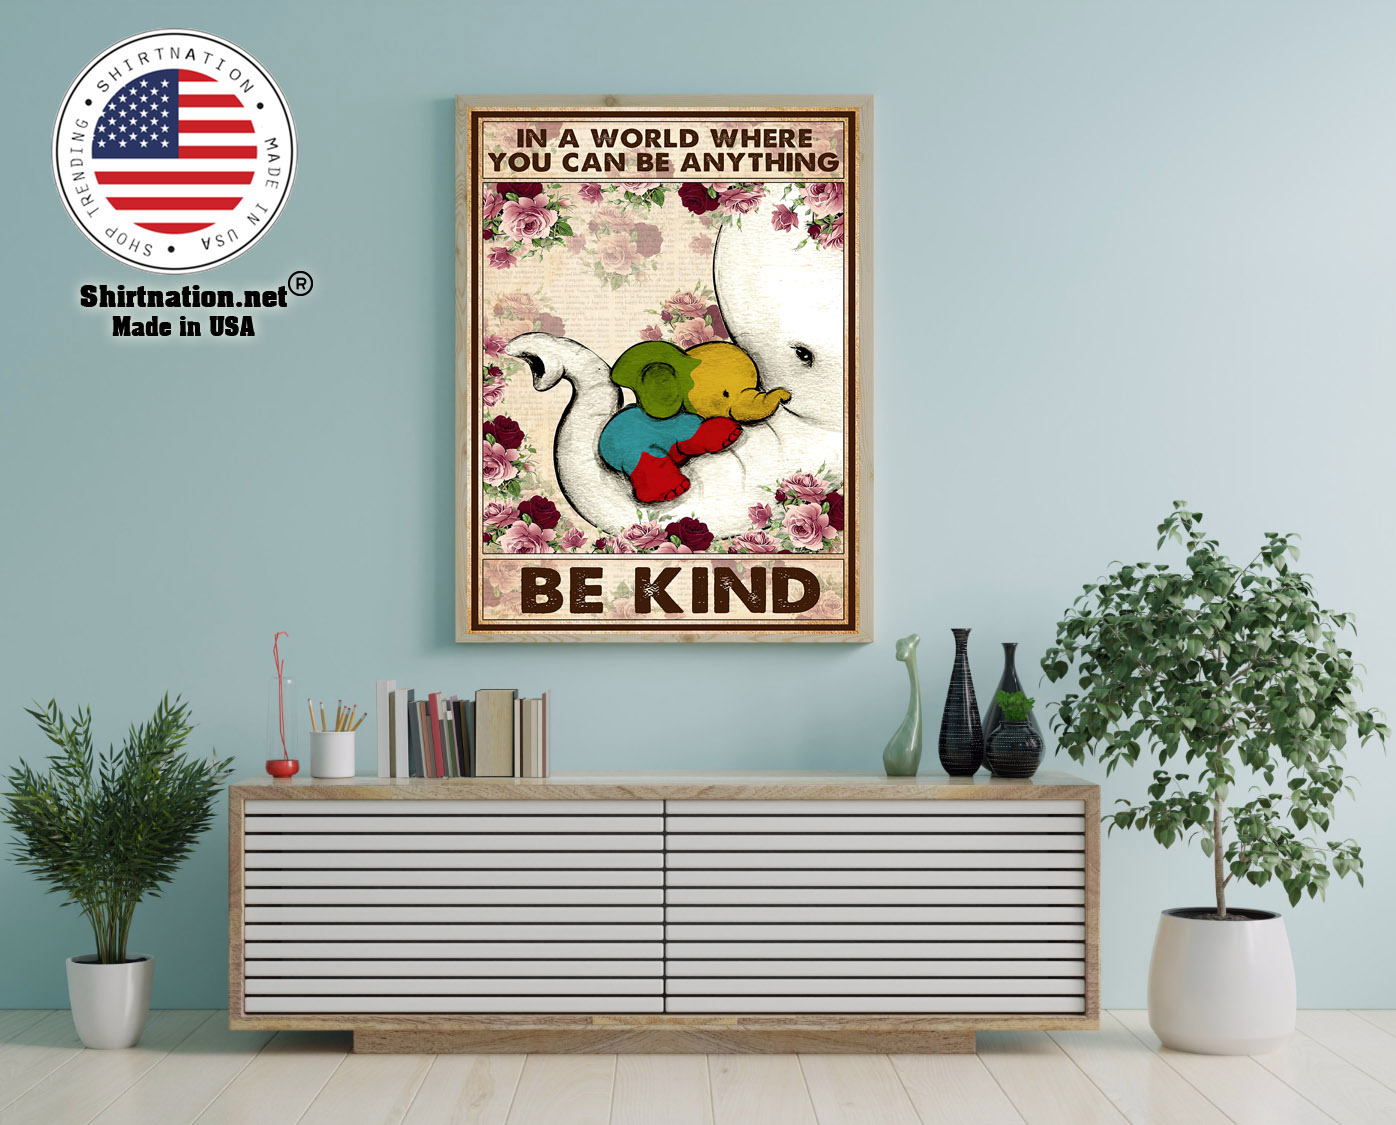 Autism Elephant In a world where you can be anything be kind poster 12